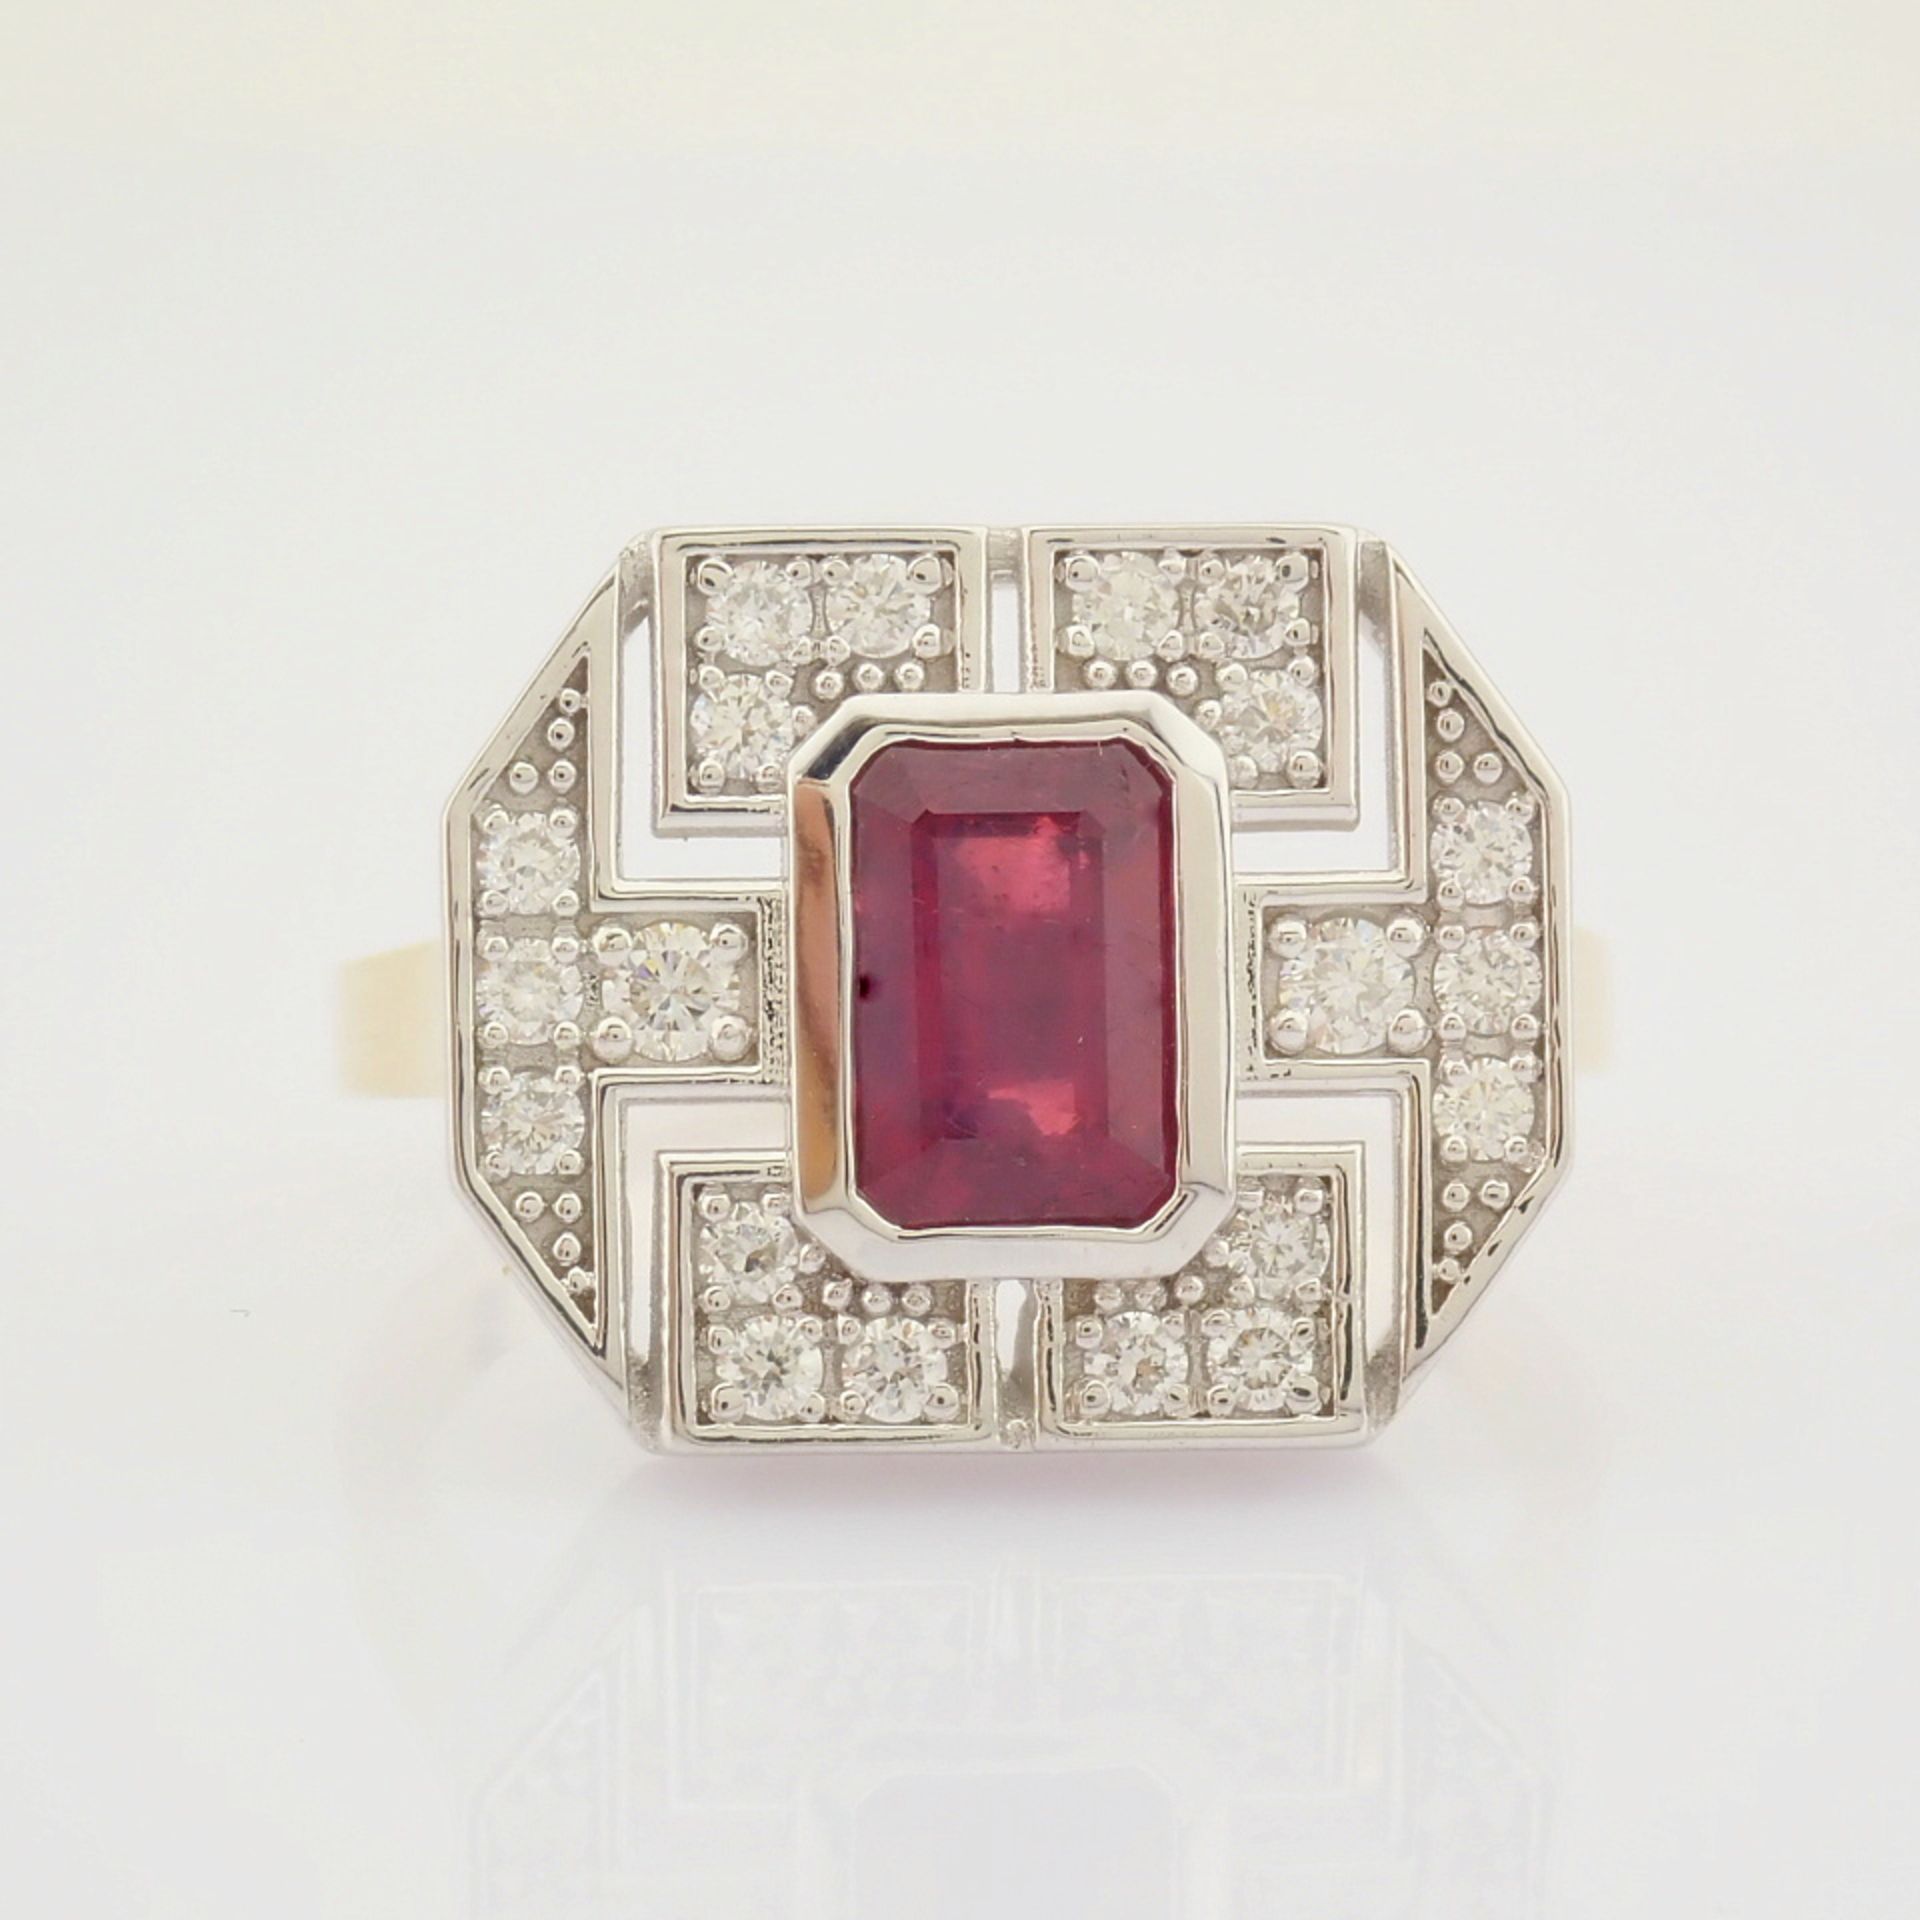 Certificated 14K Yellow and White Gold Diamond & Ruby Ring (Total 1.82 ct Stone) - Image 4 of 6